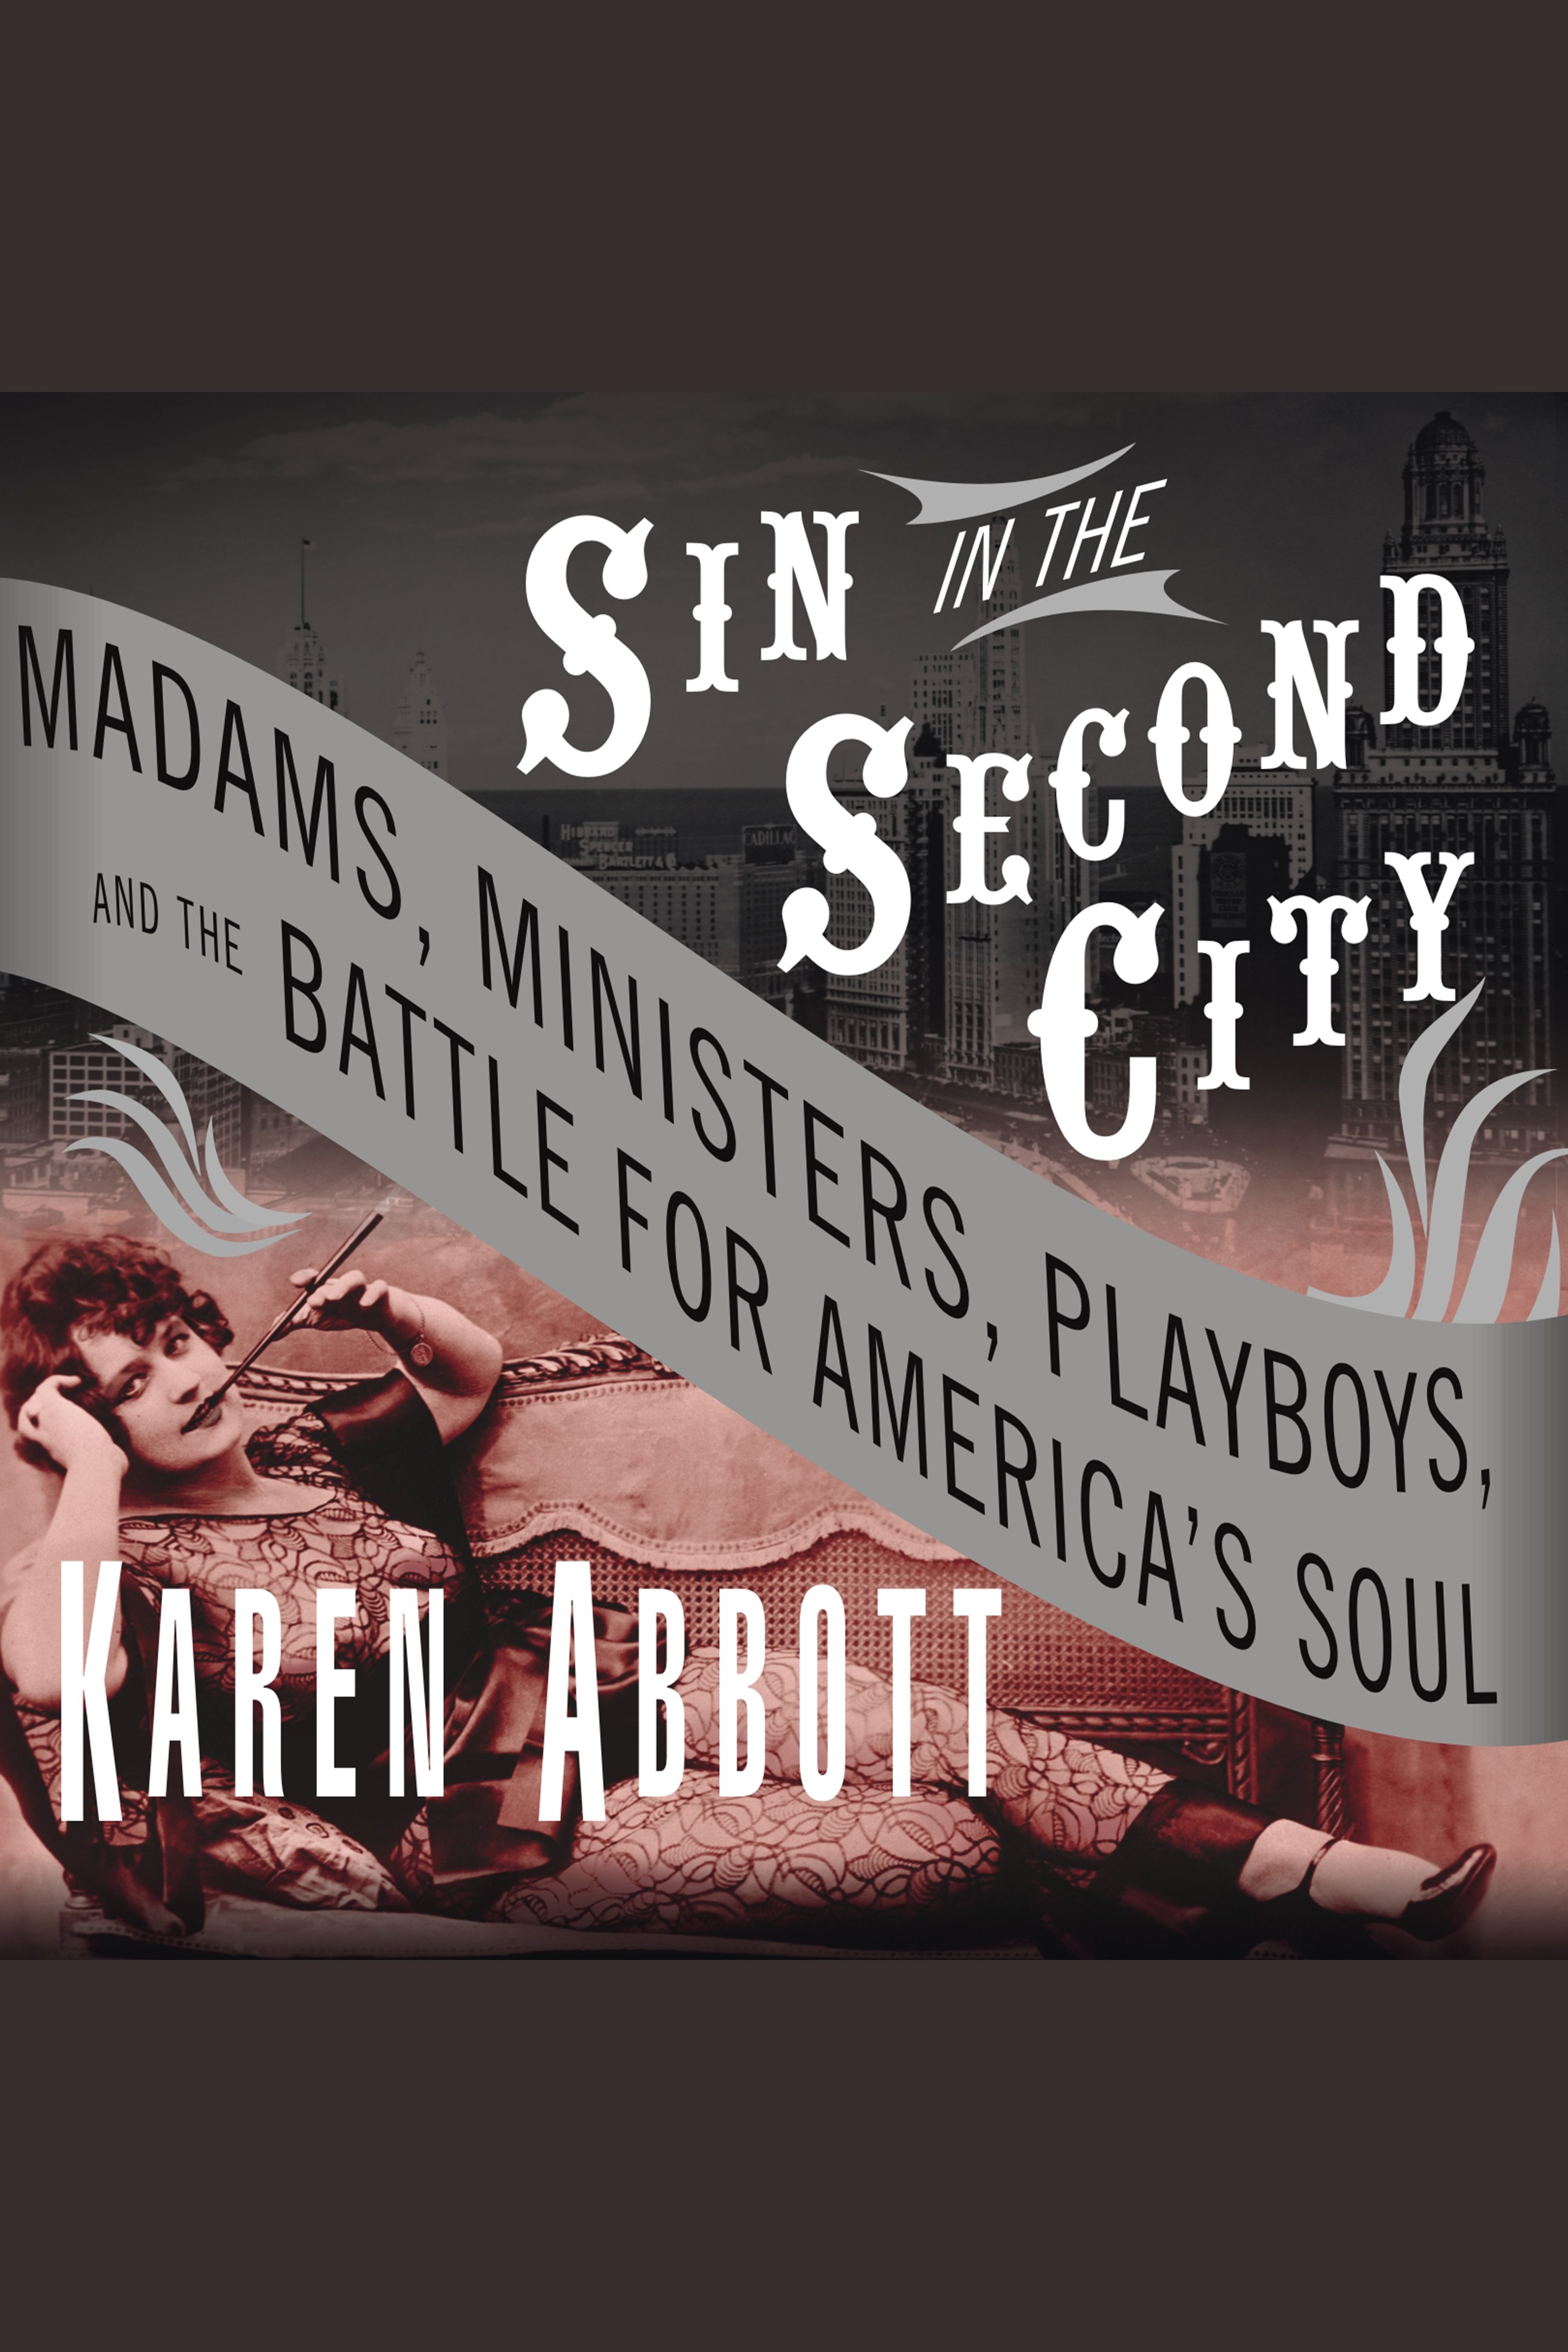 Sin in the Second City madams, ministers, playboys, and the battle for America's soul cover image